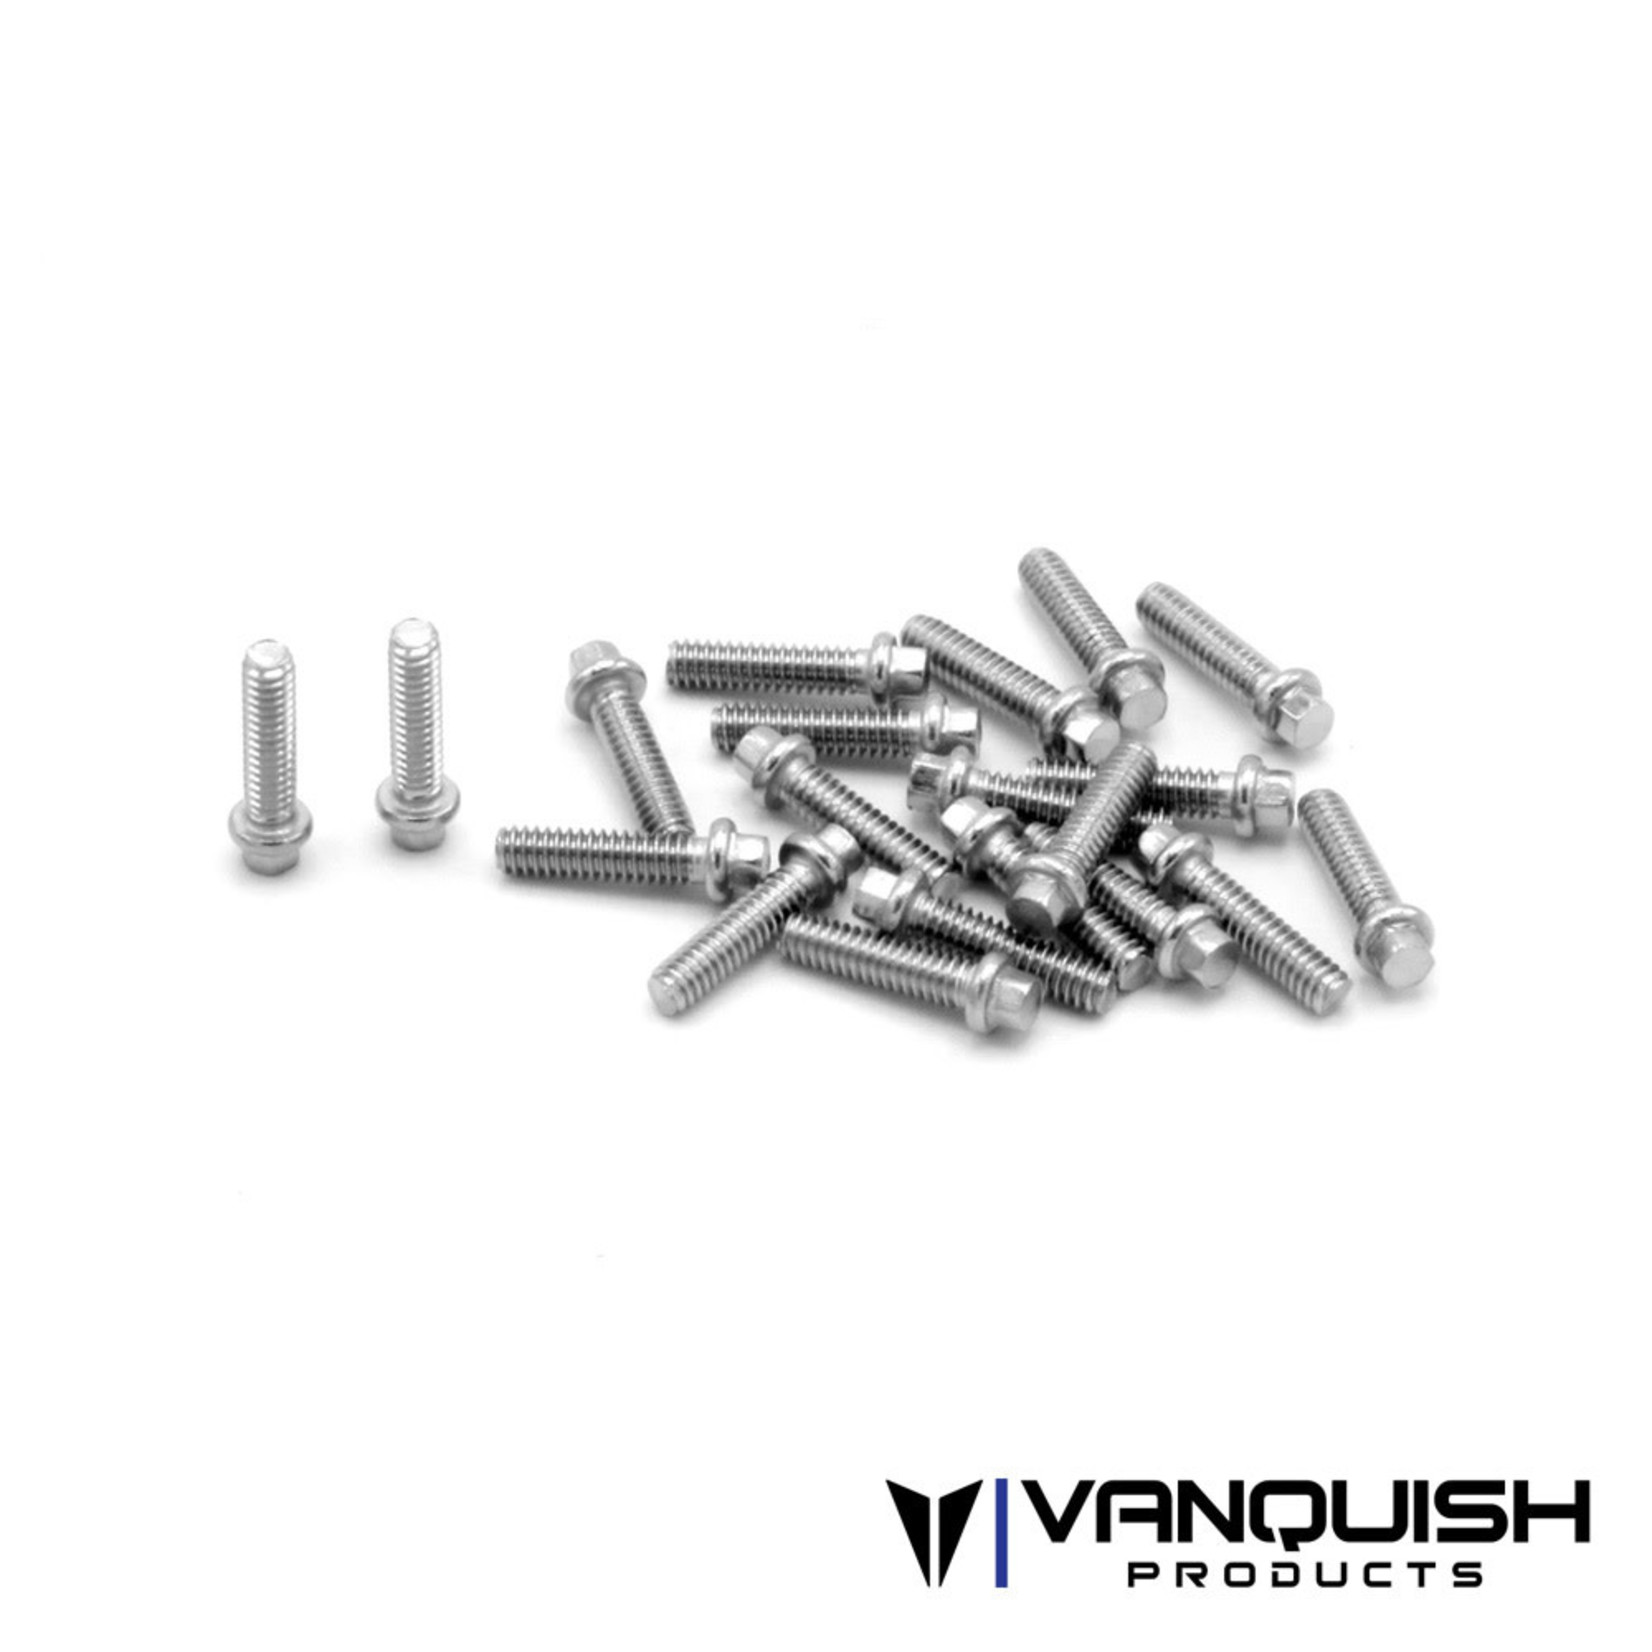 Vanquish RC Scale M2 x 8mm Stainless Hardware